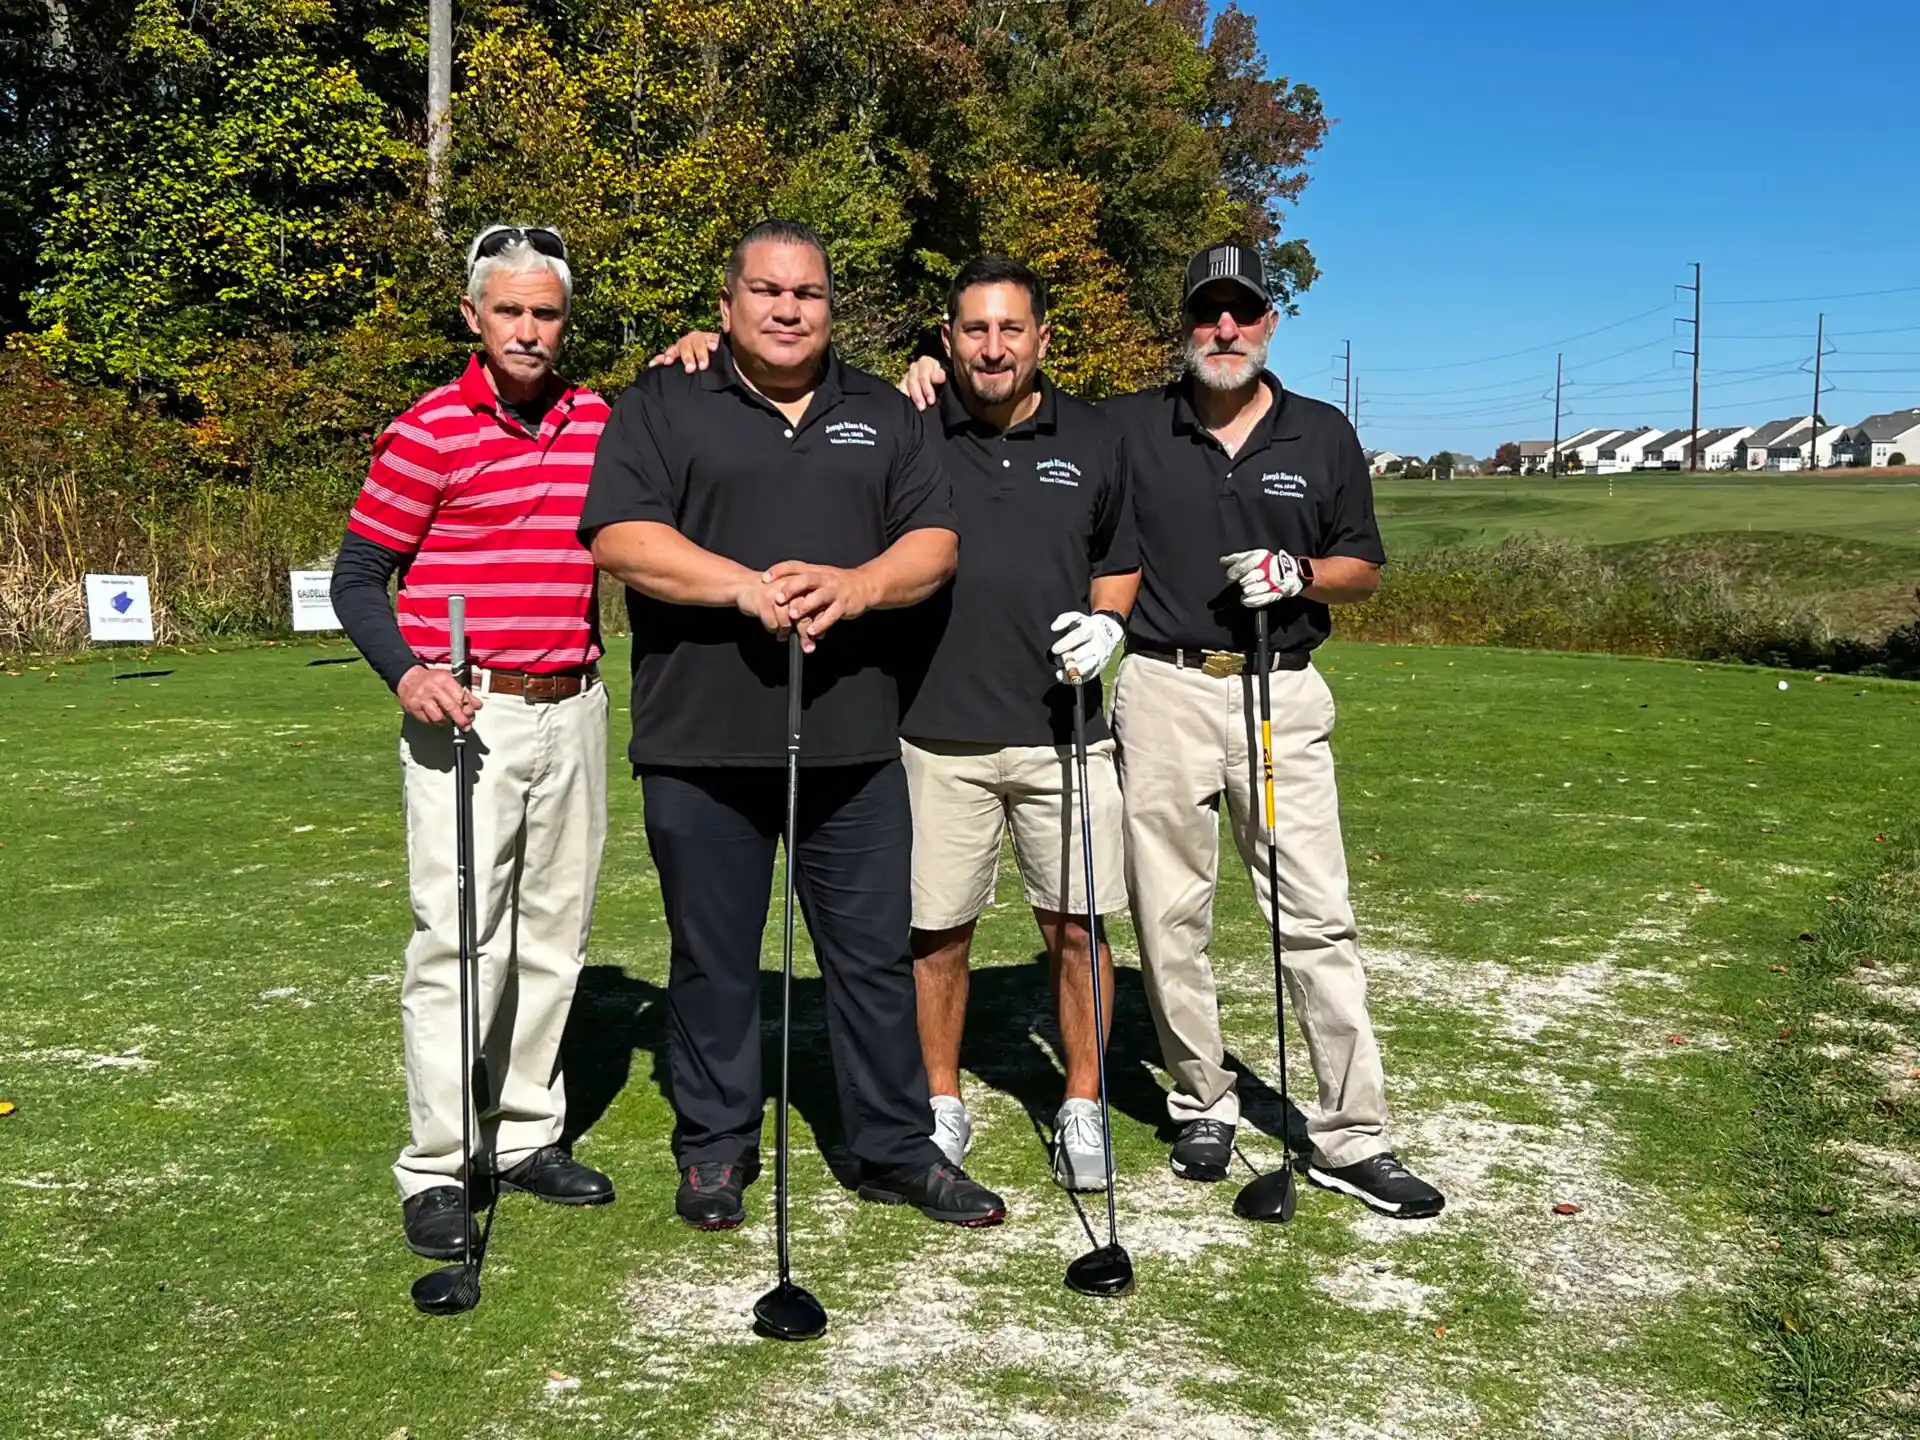 A group of people holding golf sticks in hand with trees in the back